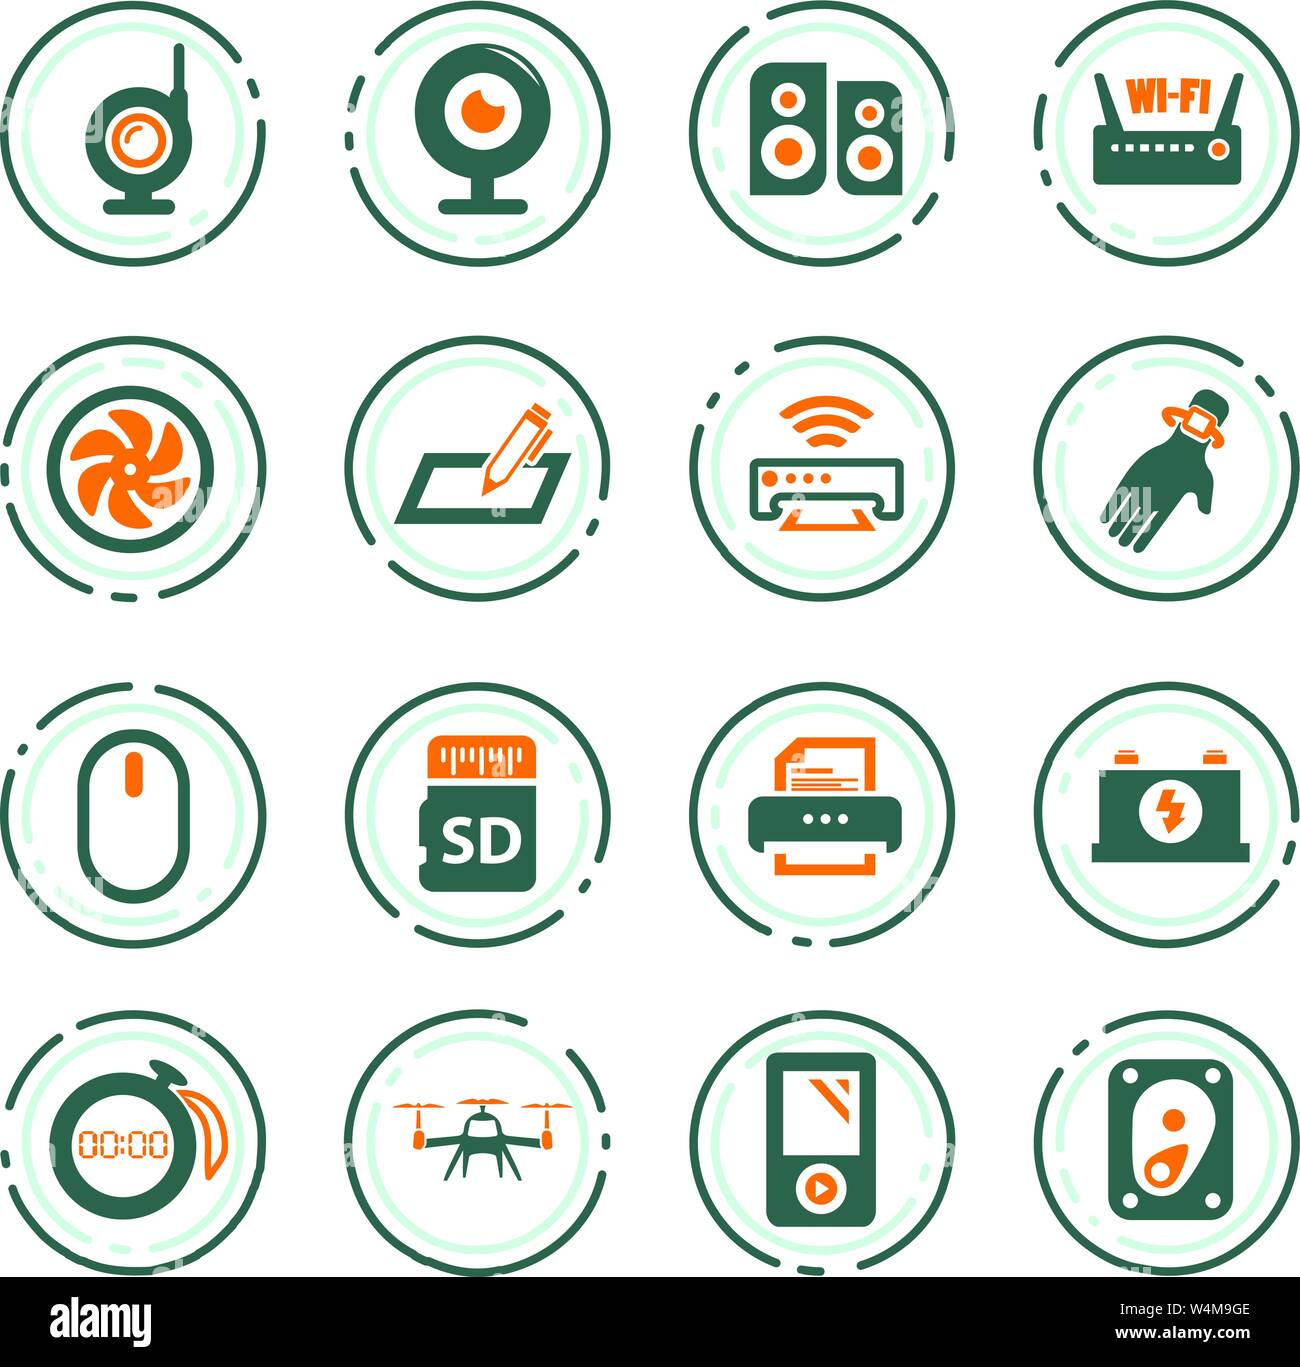 Devices vector icons for user interface design Stock Vector